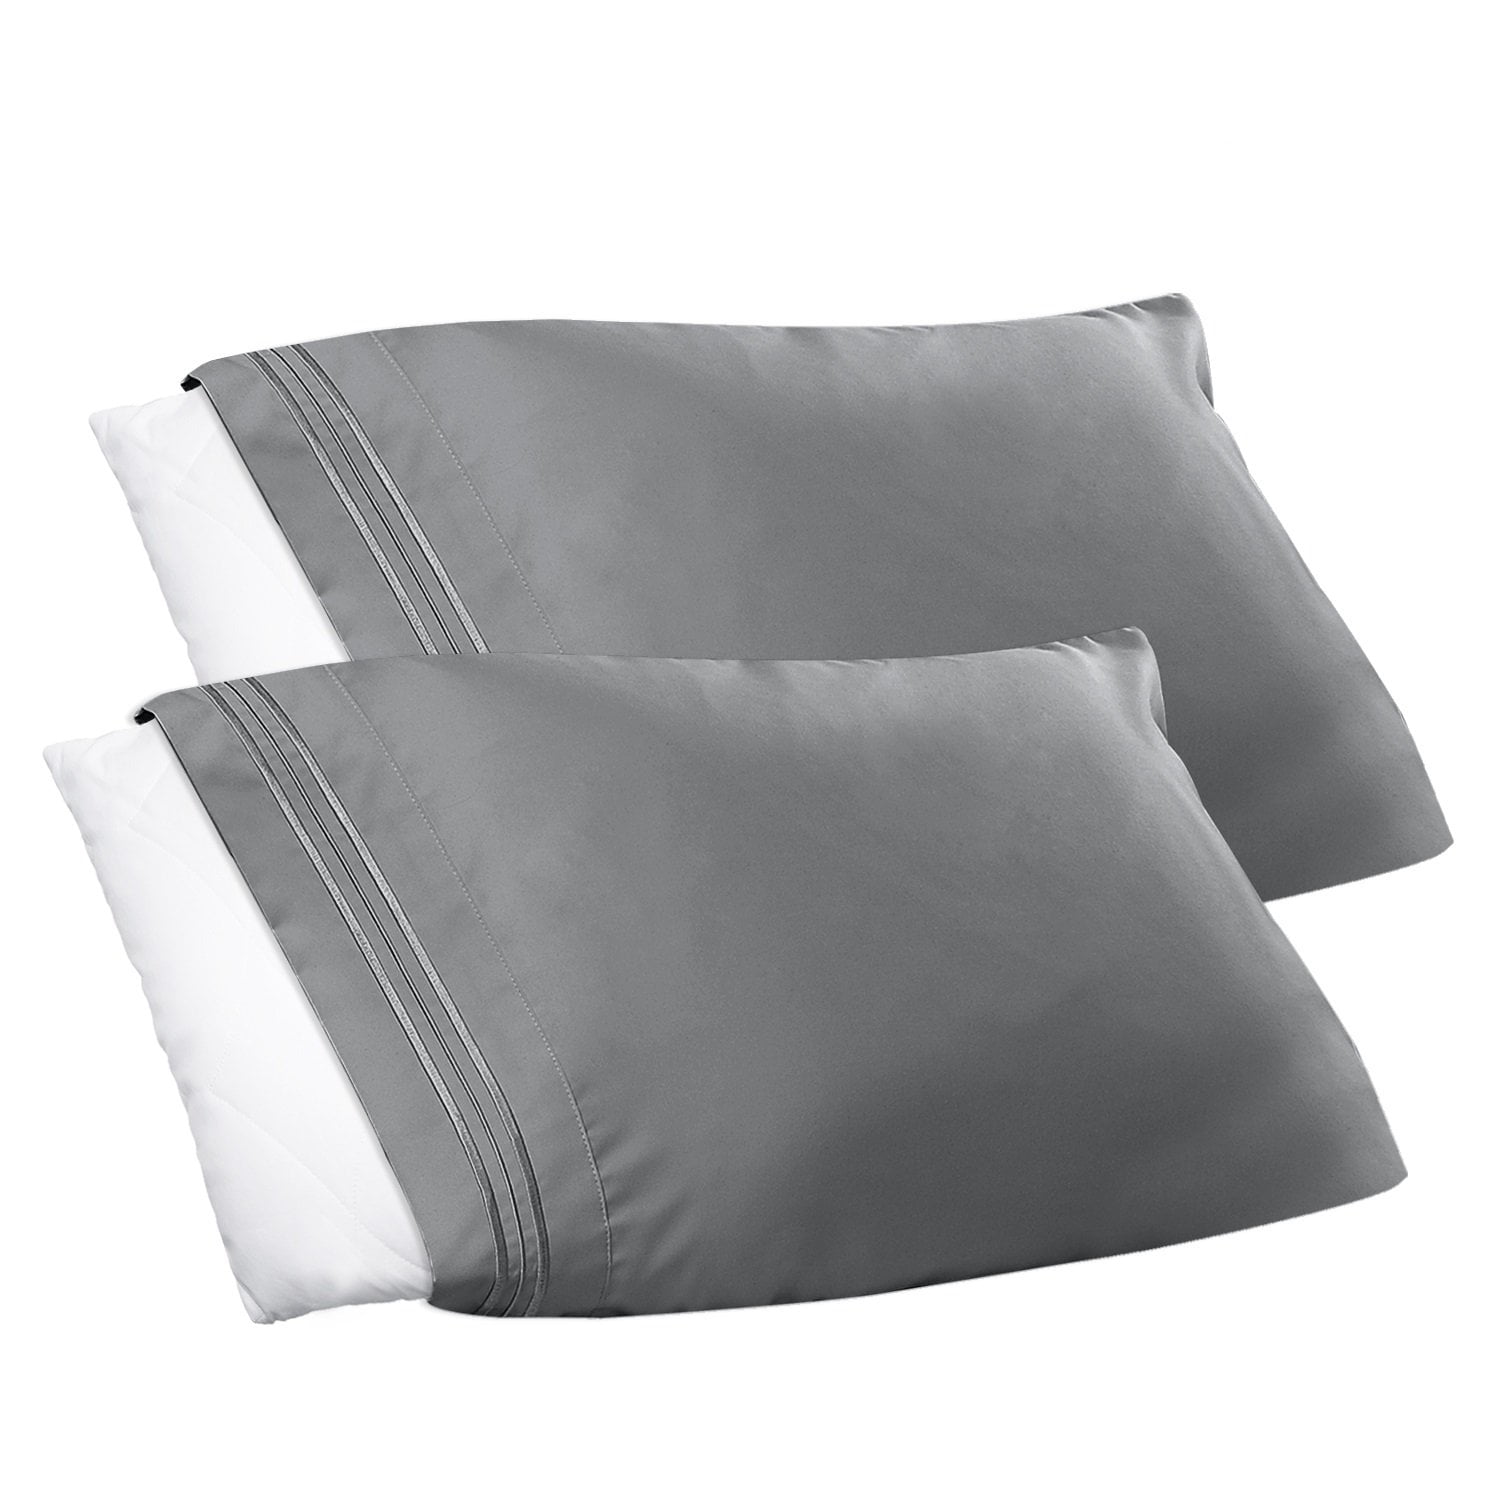 Clara Clark Queen Pillowcases Set of 2 Beach Blue. Ultra Soft Brushed Microfiber Pillow Covers with Envelop Closure